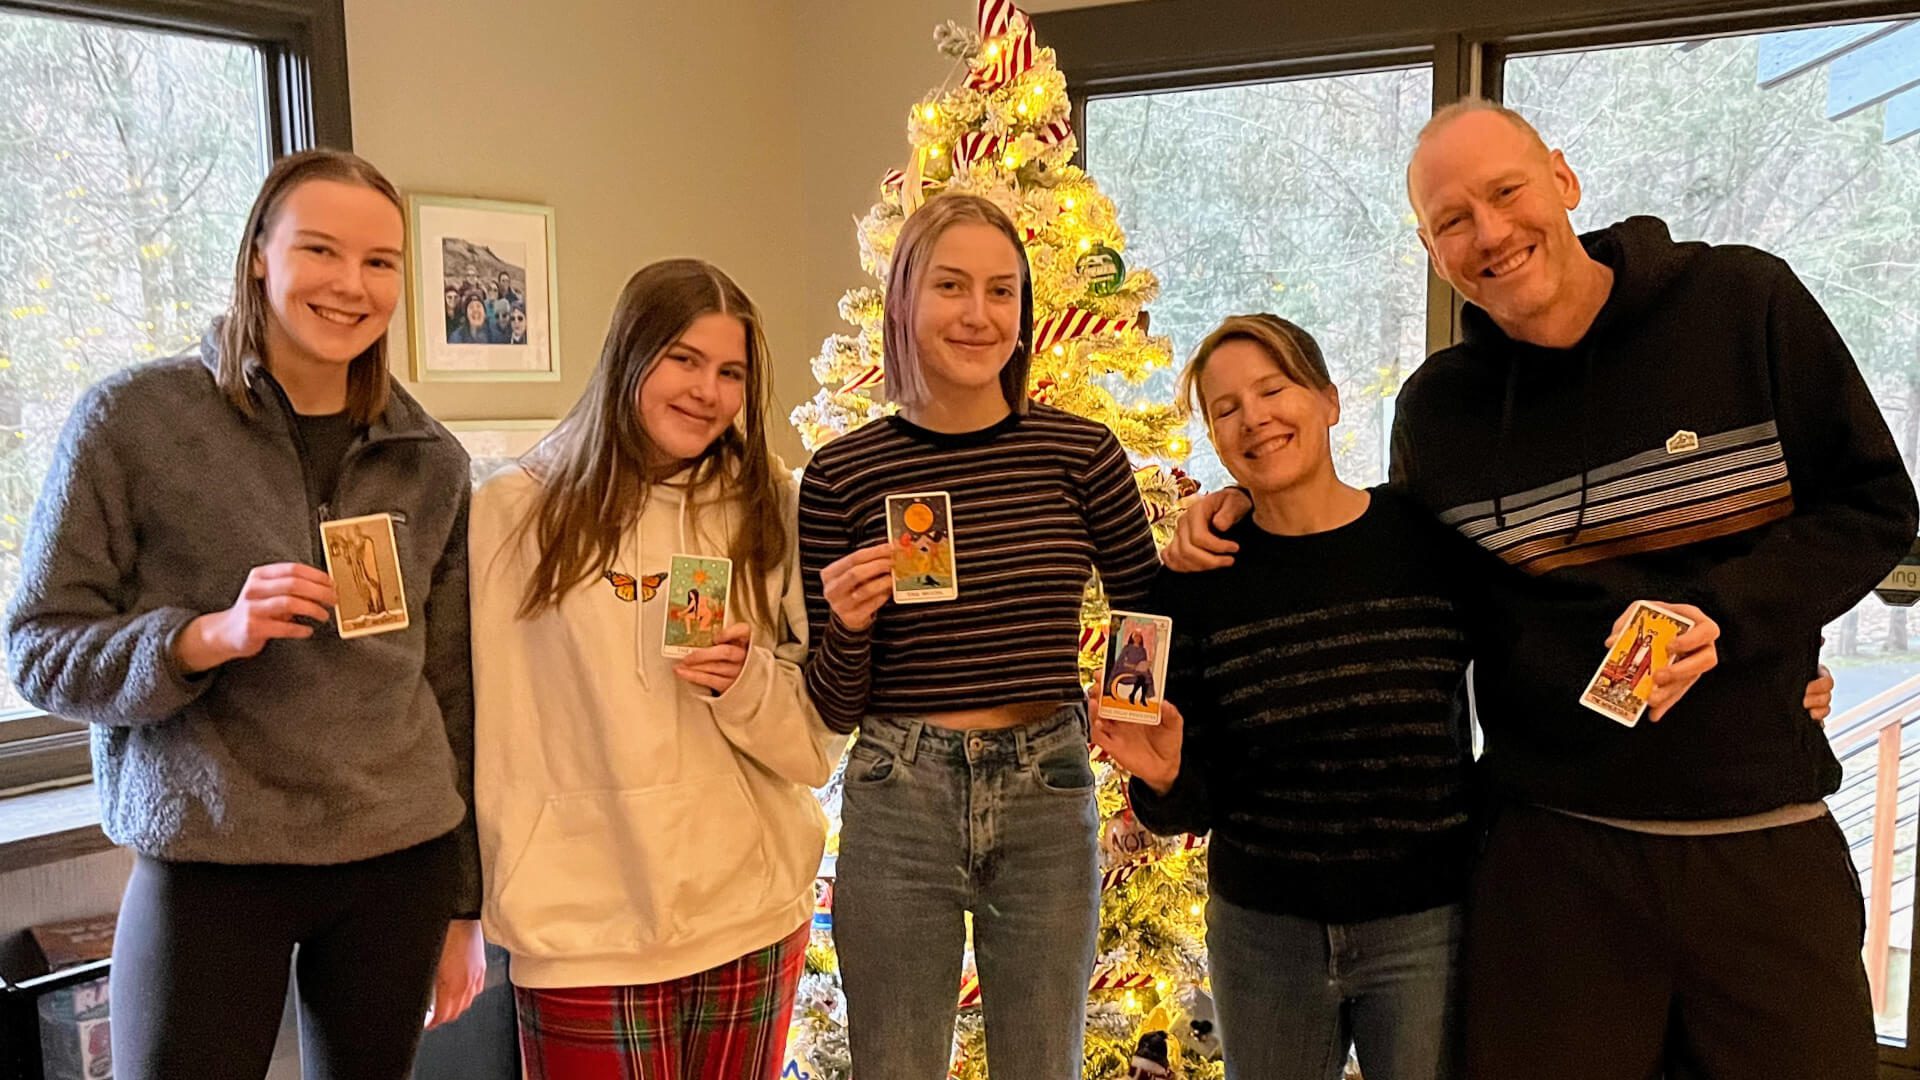 Family tarot card reading during Christmas visit to Asheville, NC.